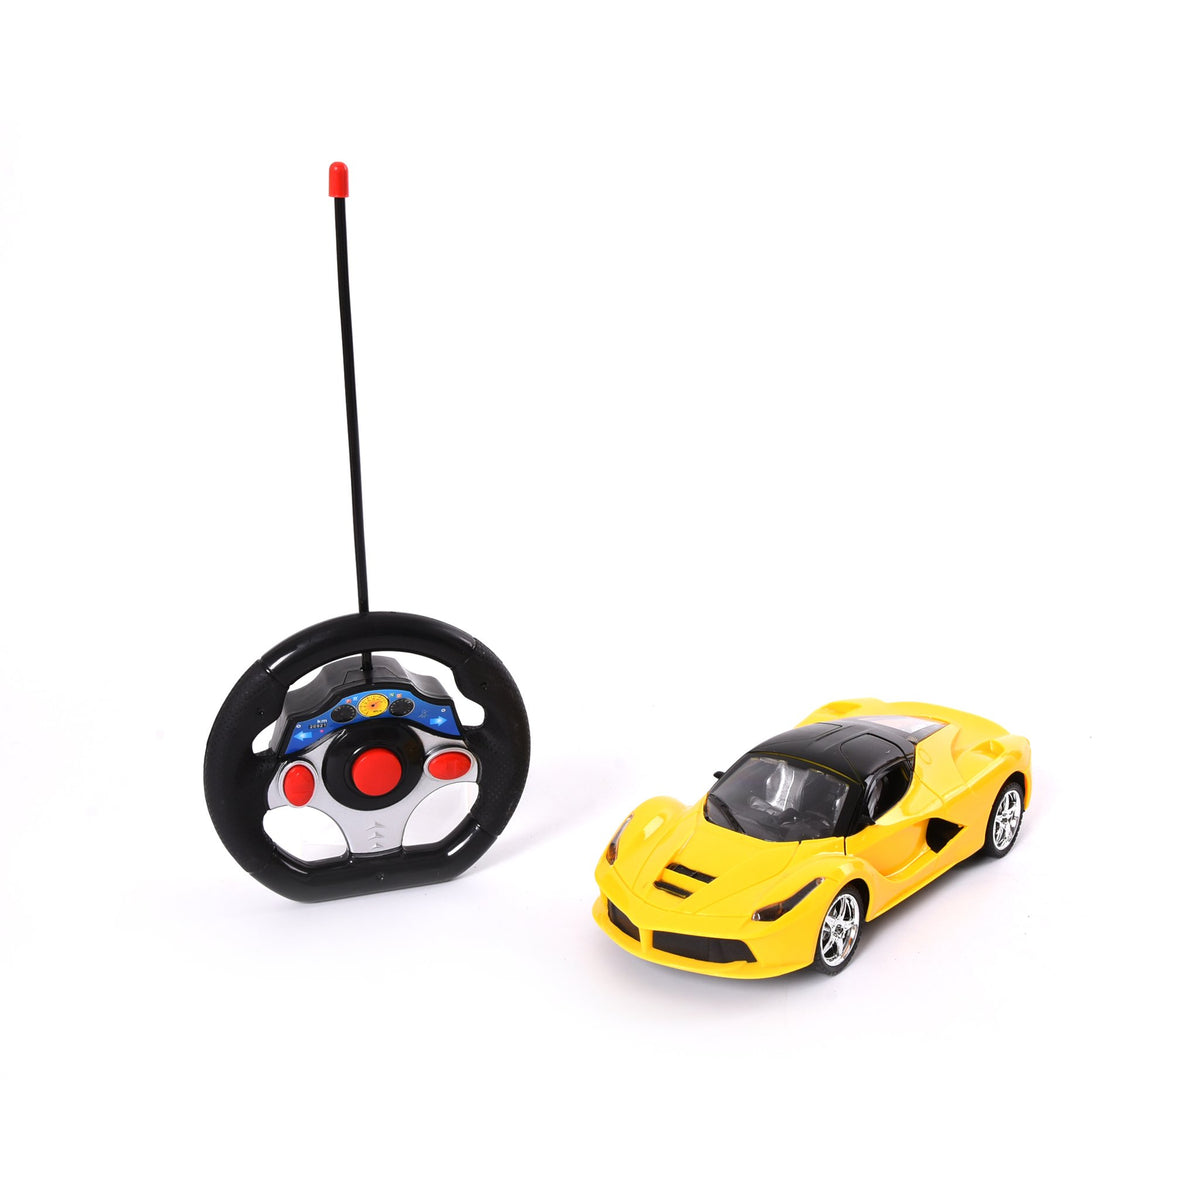 Wonderplay 1:18 Scale Remote Control Sports Car, Headlights, Opening Doors, Red/Yellow